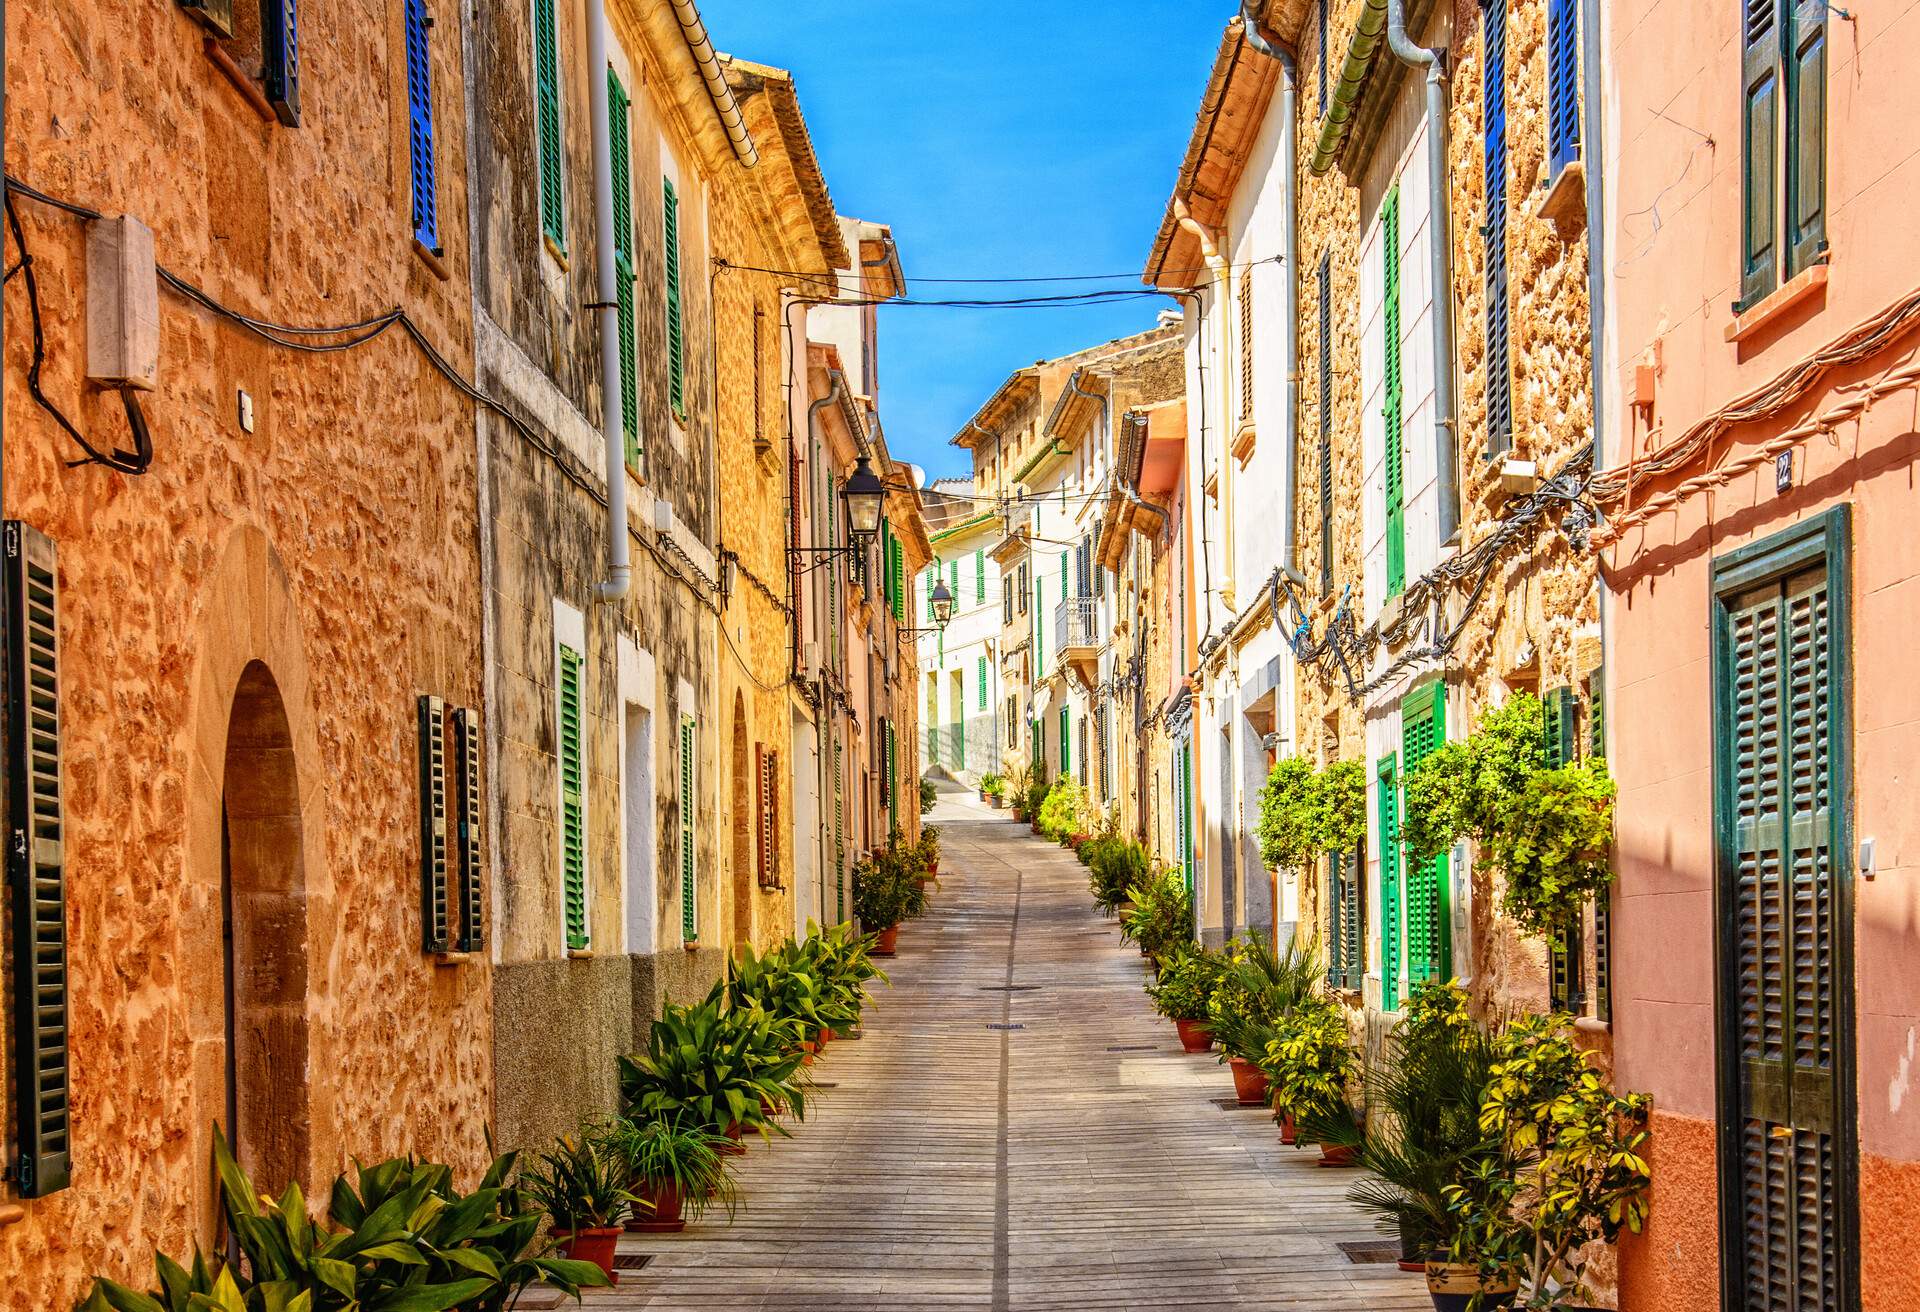 Beautiful street with traditional majorcian houses in the town of Alcudia, Majorca (Spain).